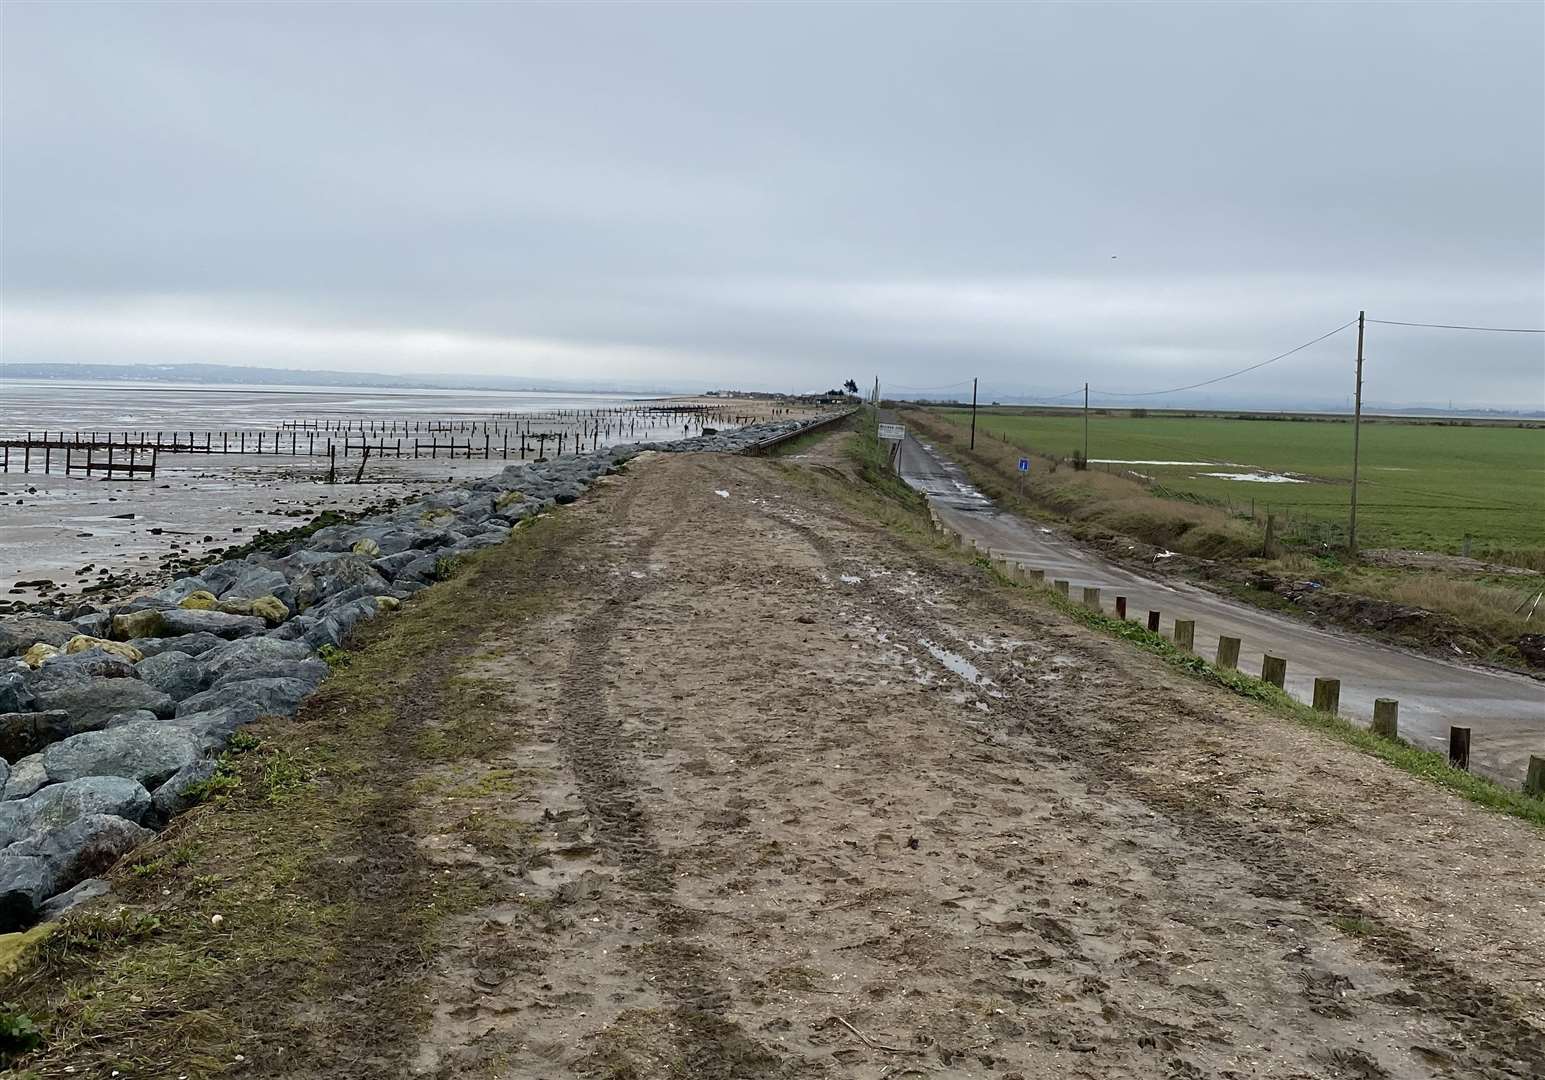 Sea defence works are being carried out along the coast, in Shellness near Leysdown